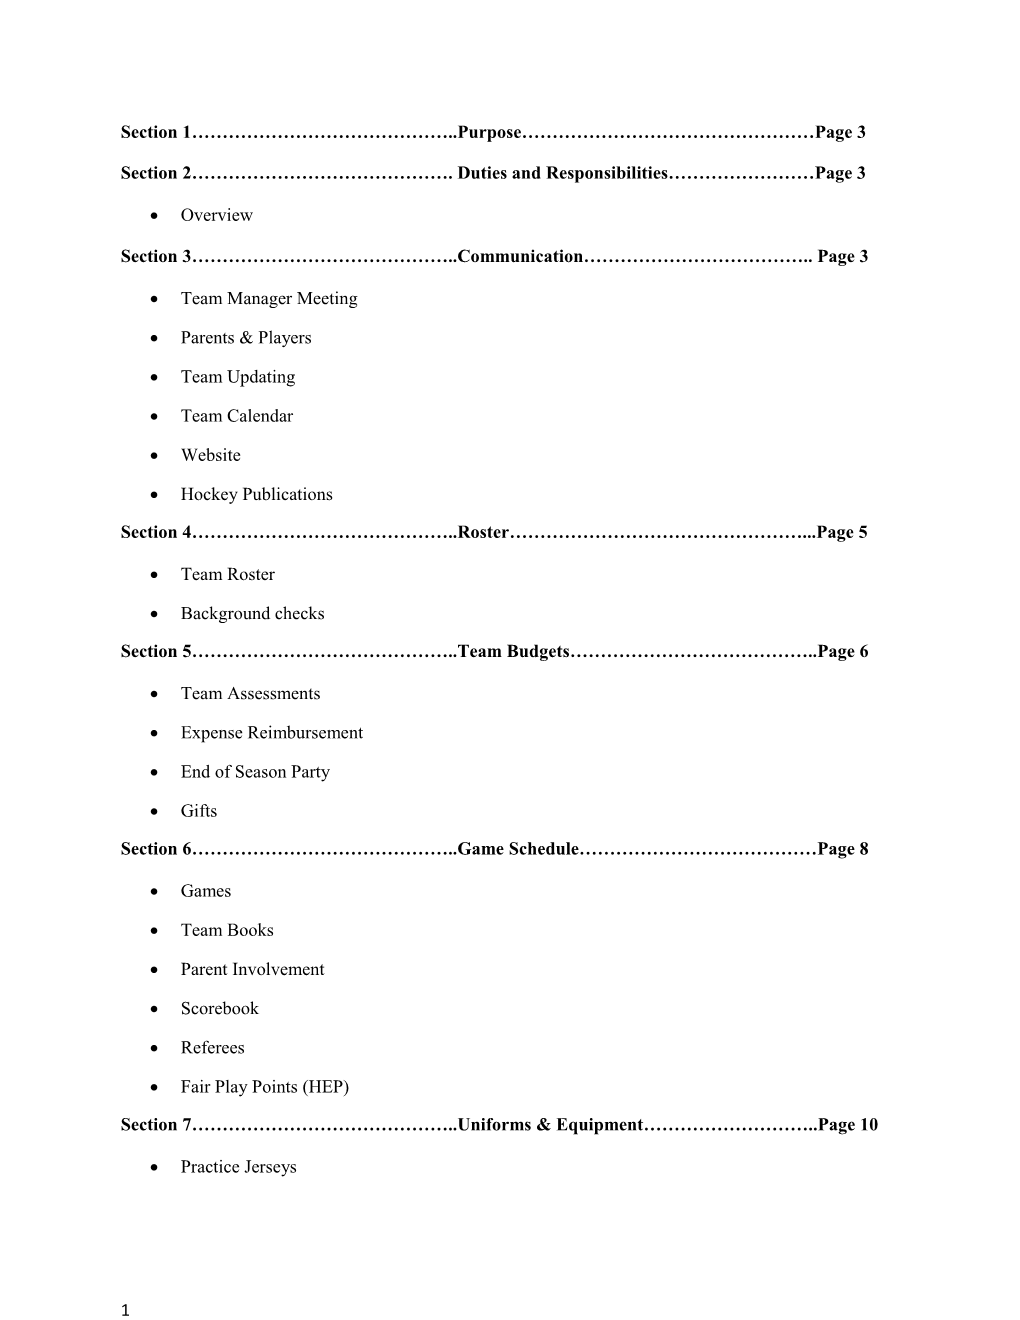 Section 2 . Duties and Responsibilities Page 3